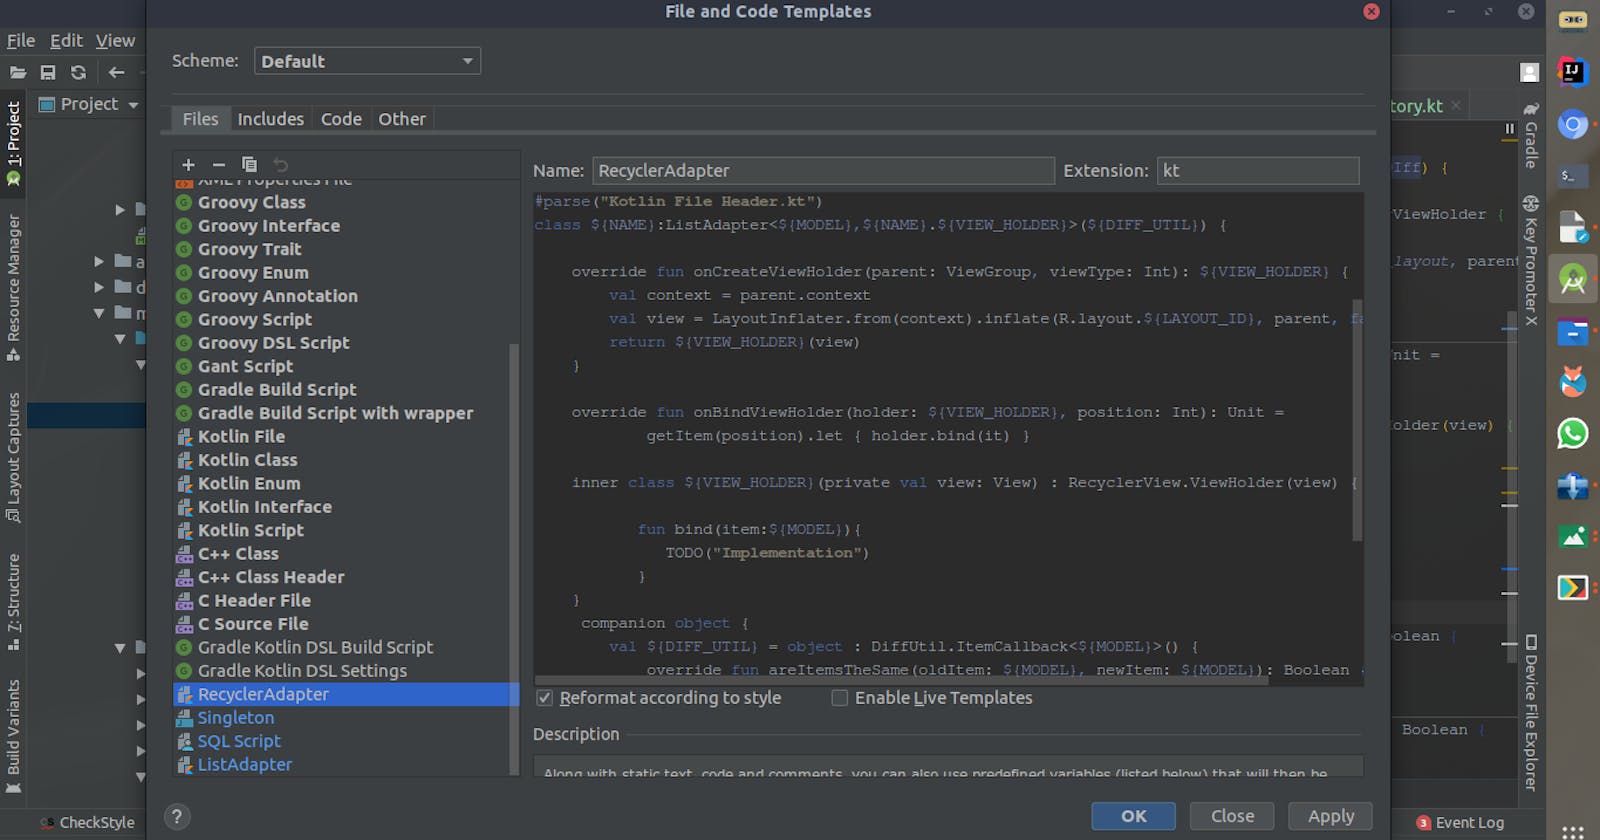 Save Development Time with Android Studios' File Templates